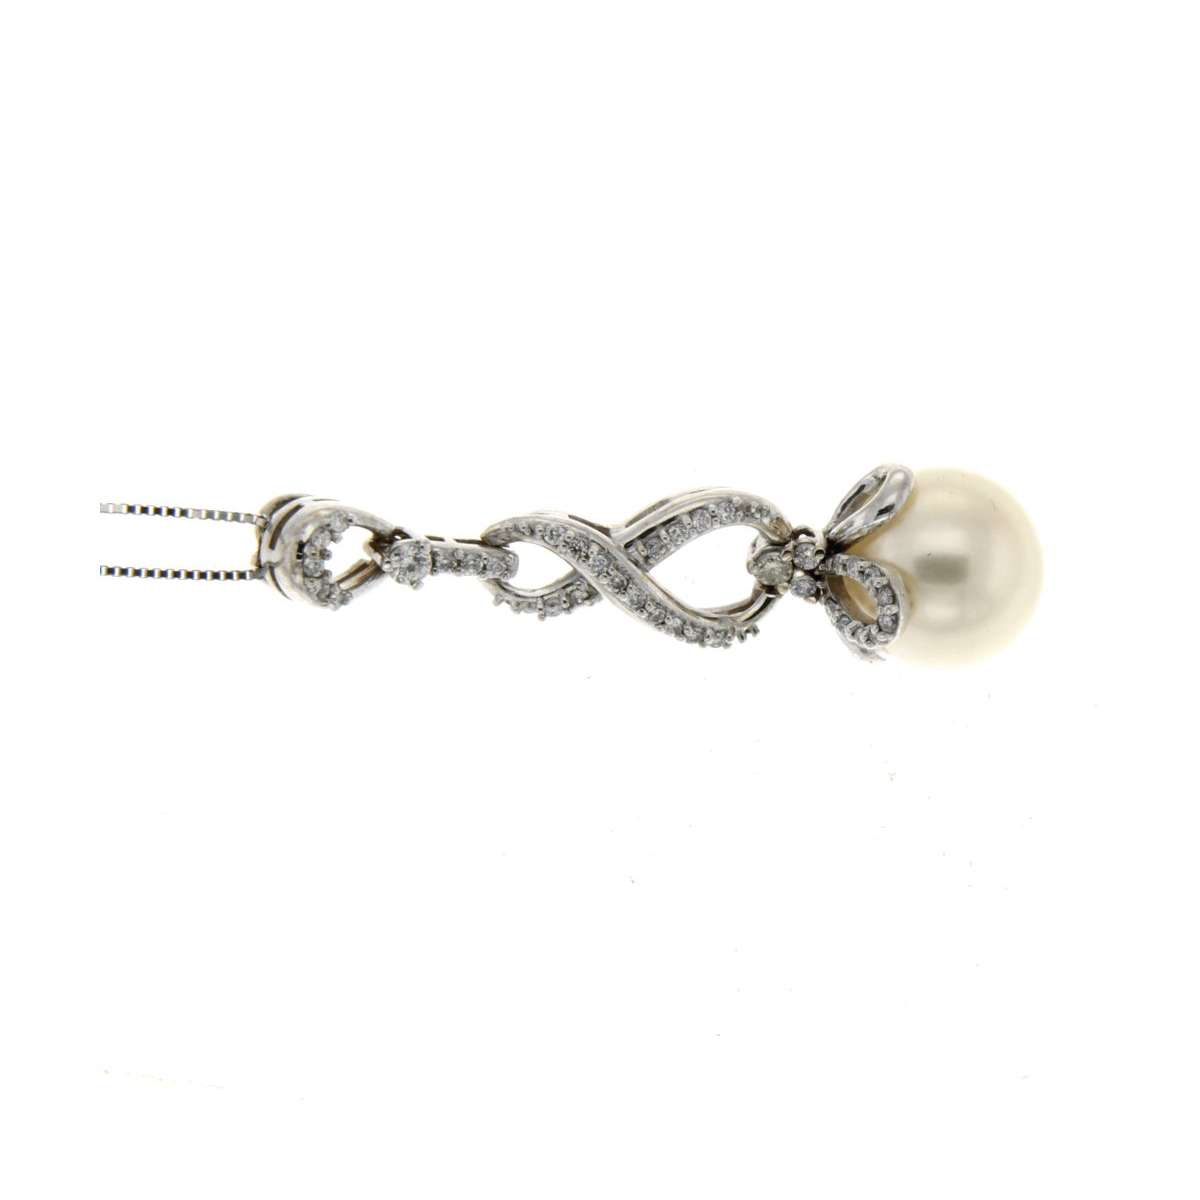 Necklace for women with a fancy articulated pendant 10mm pearl 0.42 carats diamonds G-VS1